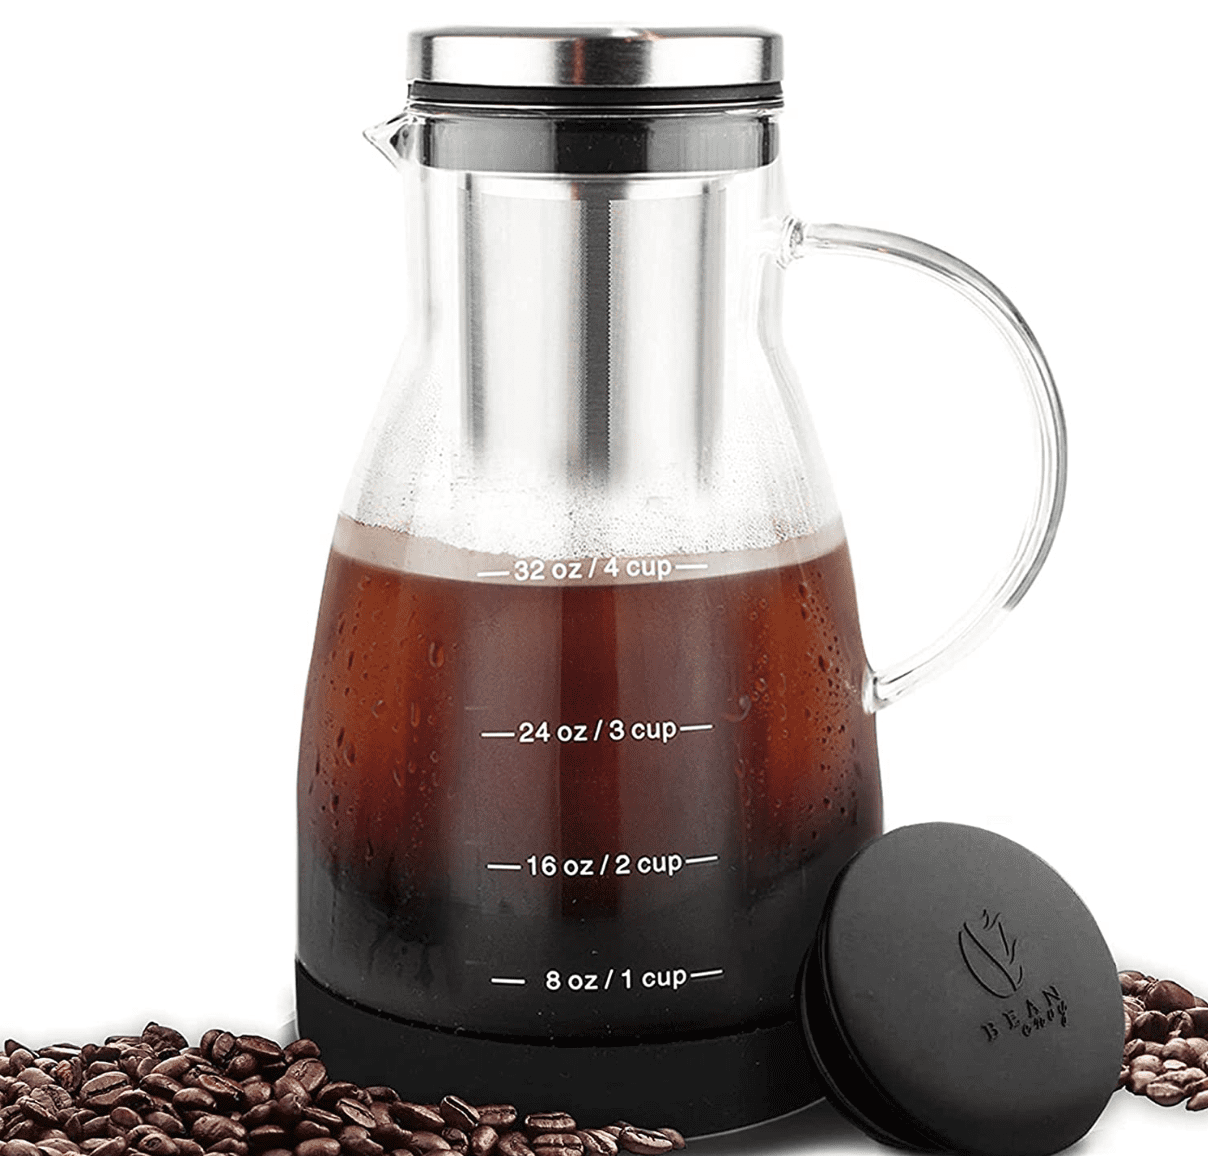 https://cdn.apartmenttherapy.info/image/upload/v1680529578/commerce/Amazon-Bean-Envy-Cold-Brew-Coffee-Maker.png